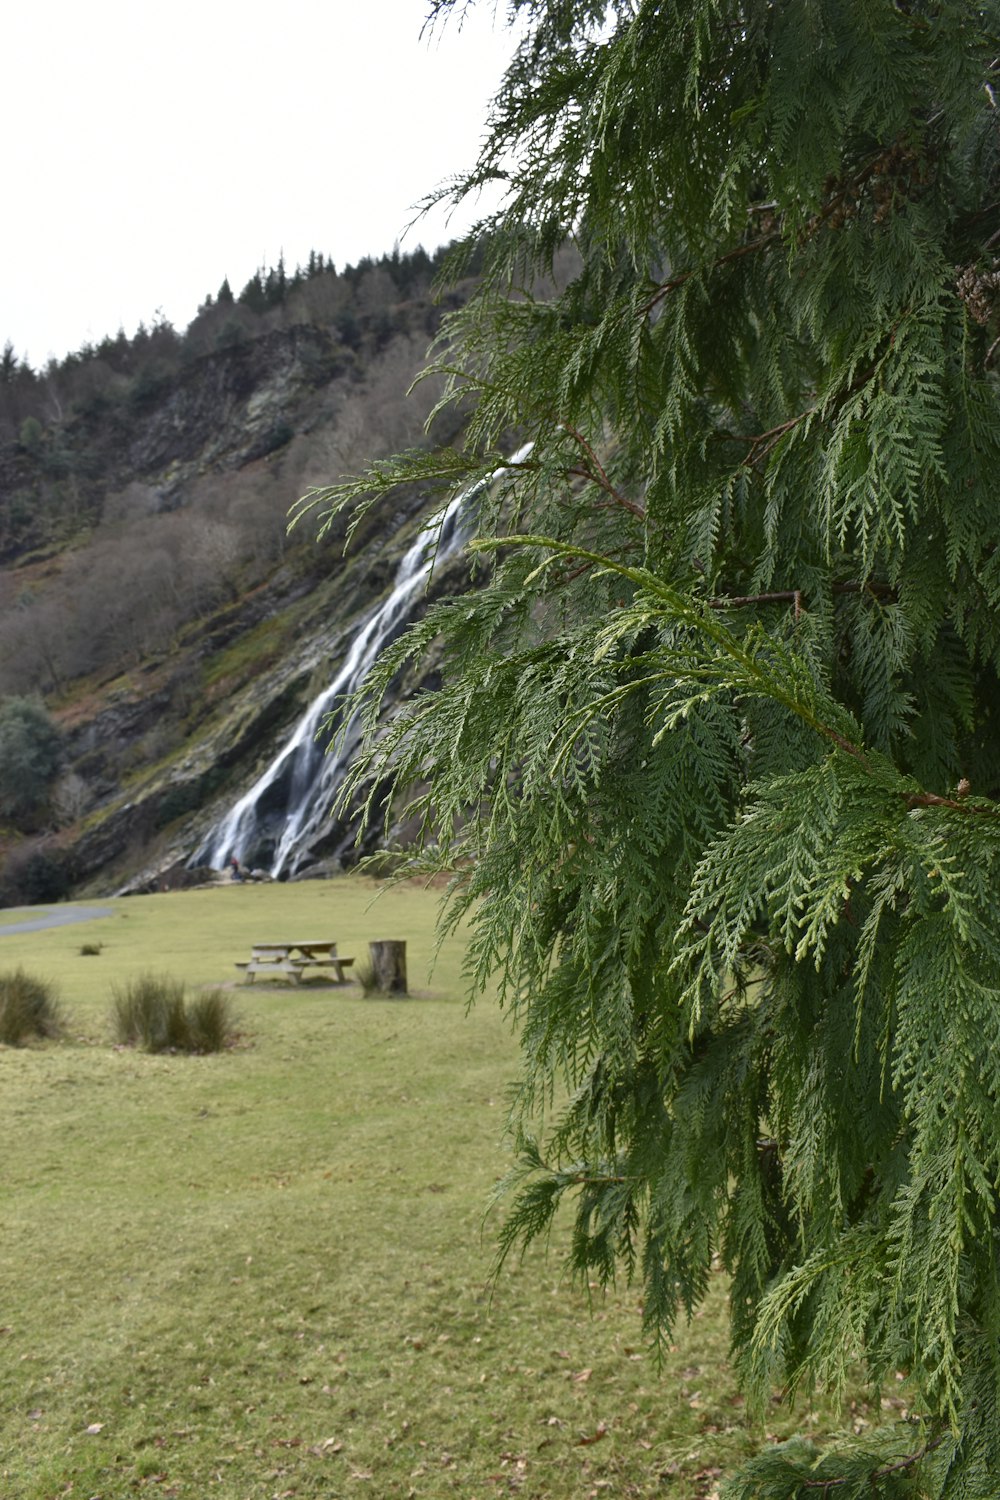 a bench under a tree in front of a waterfall